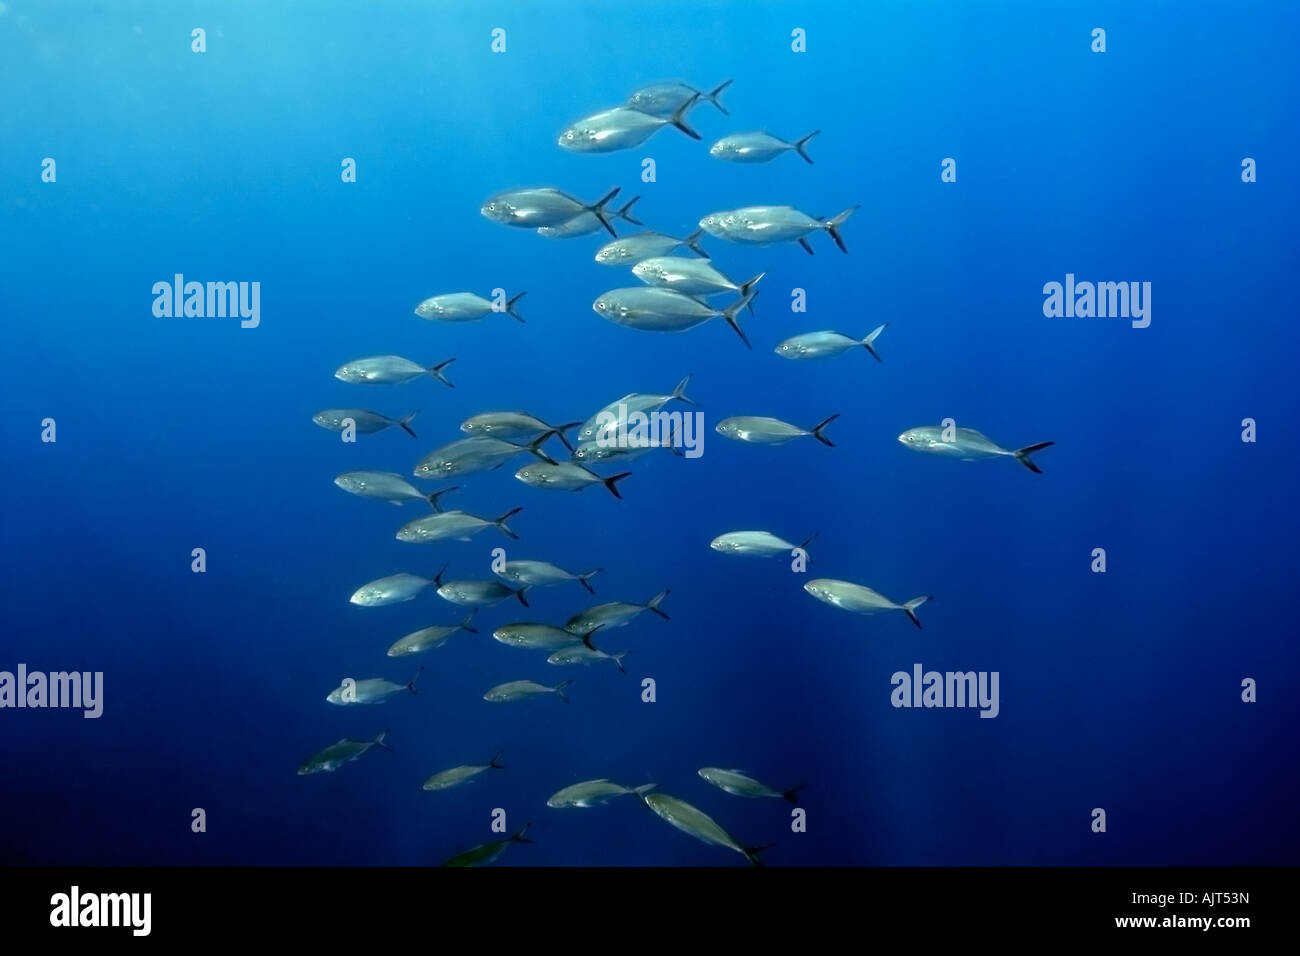 Blue runners Carangoides crysos schooling in open water St Peter and St Paul s rocks Brazil Atlantic Ocean Stock Photo